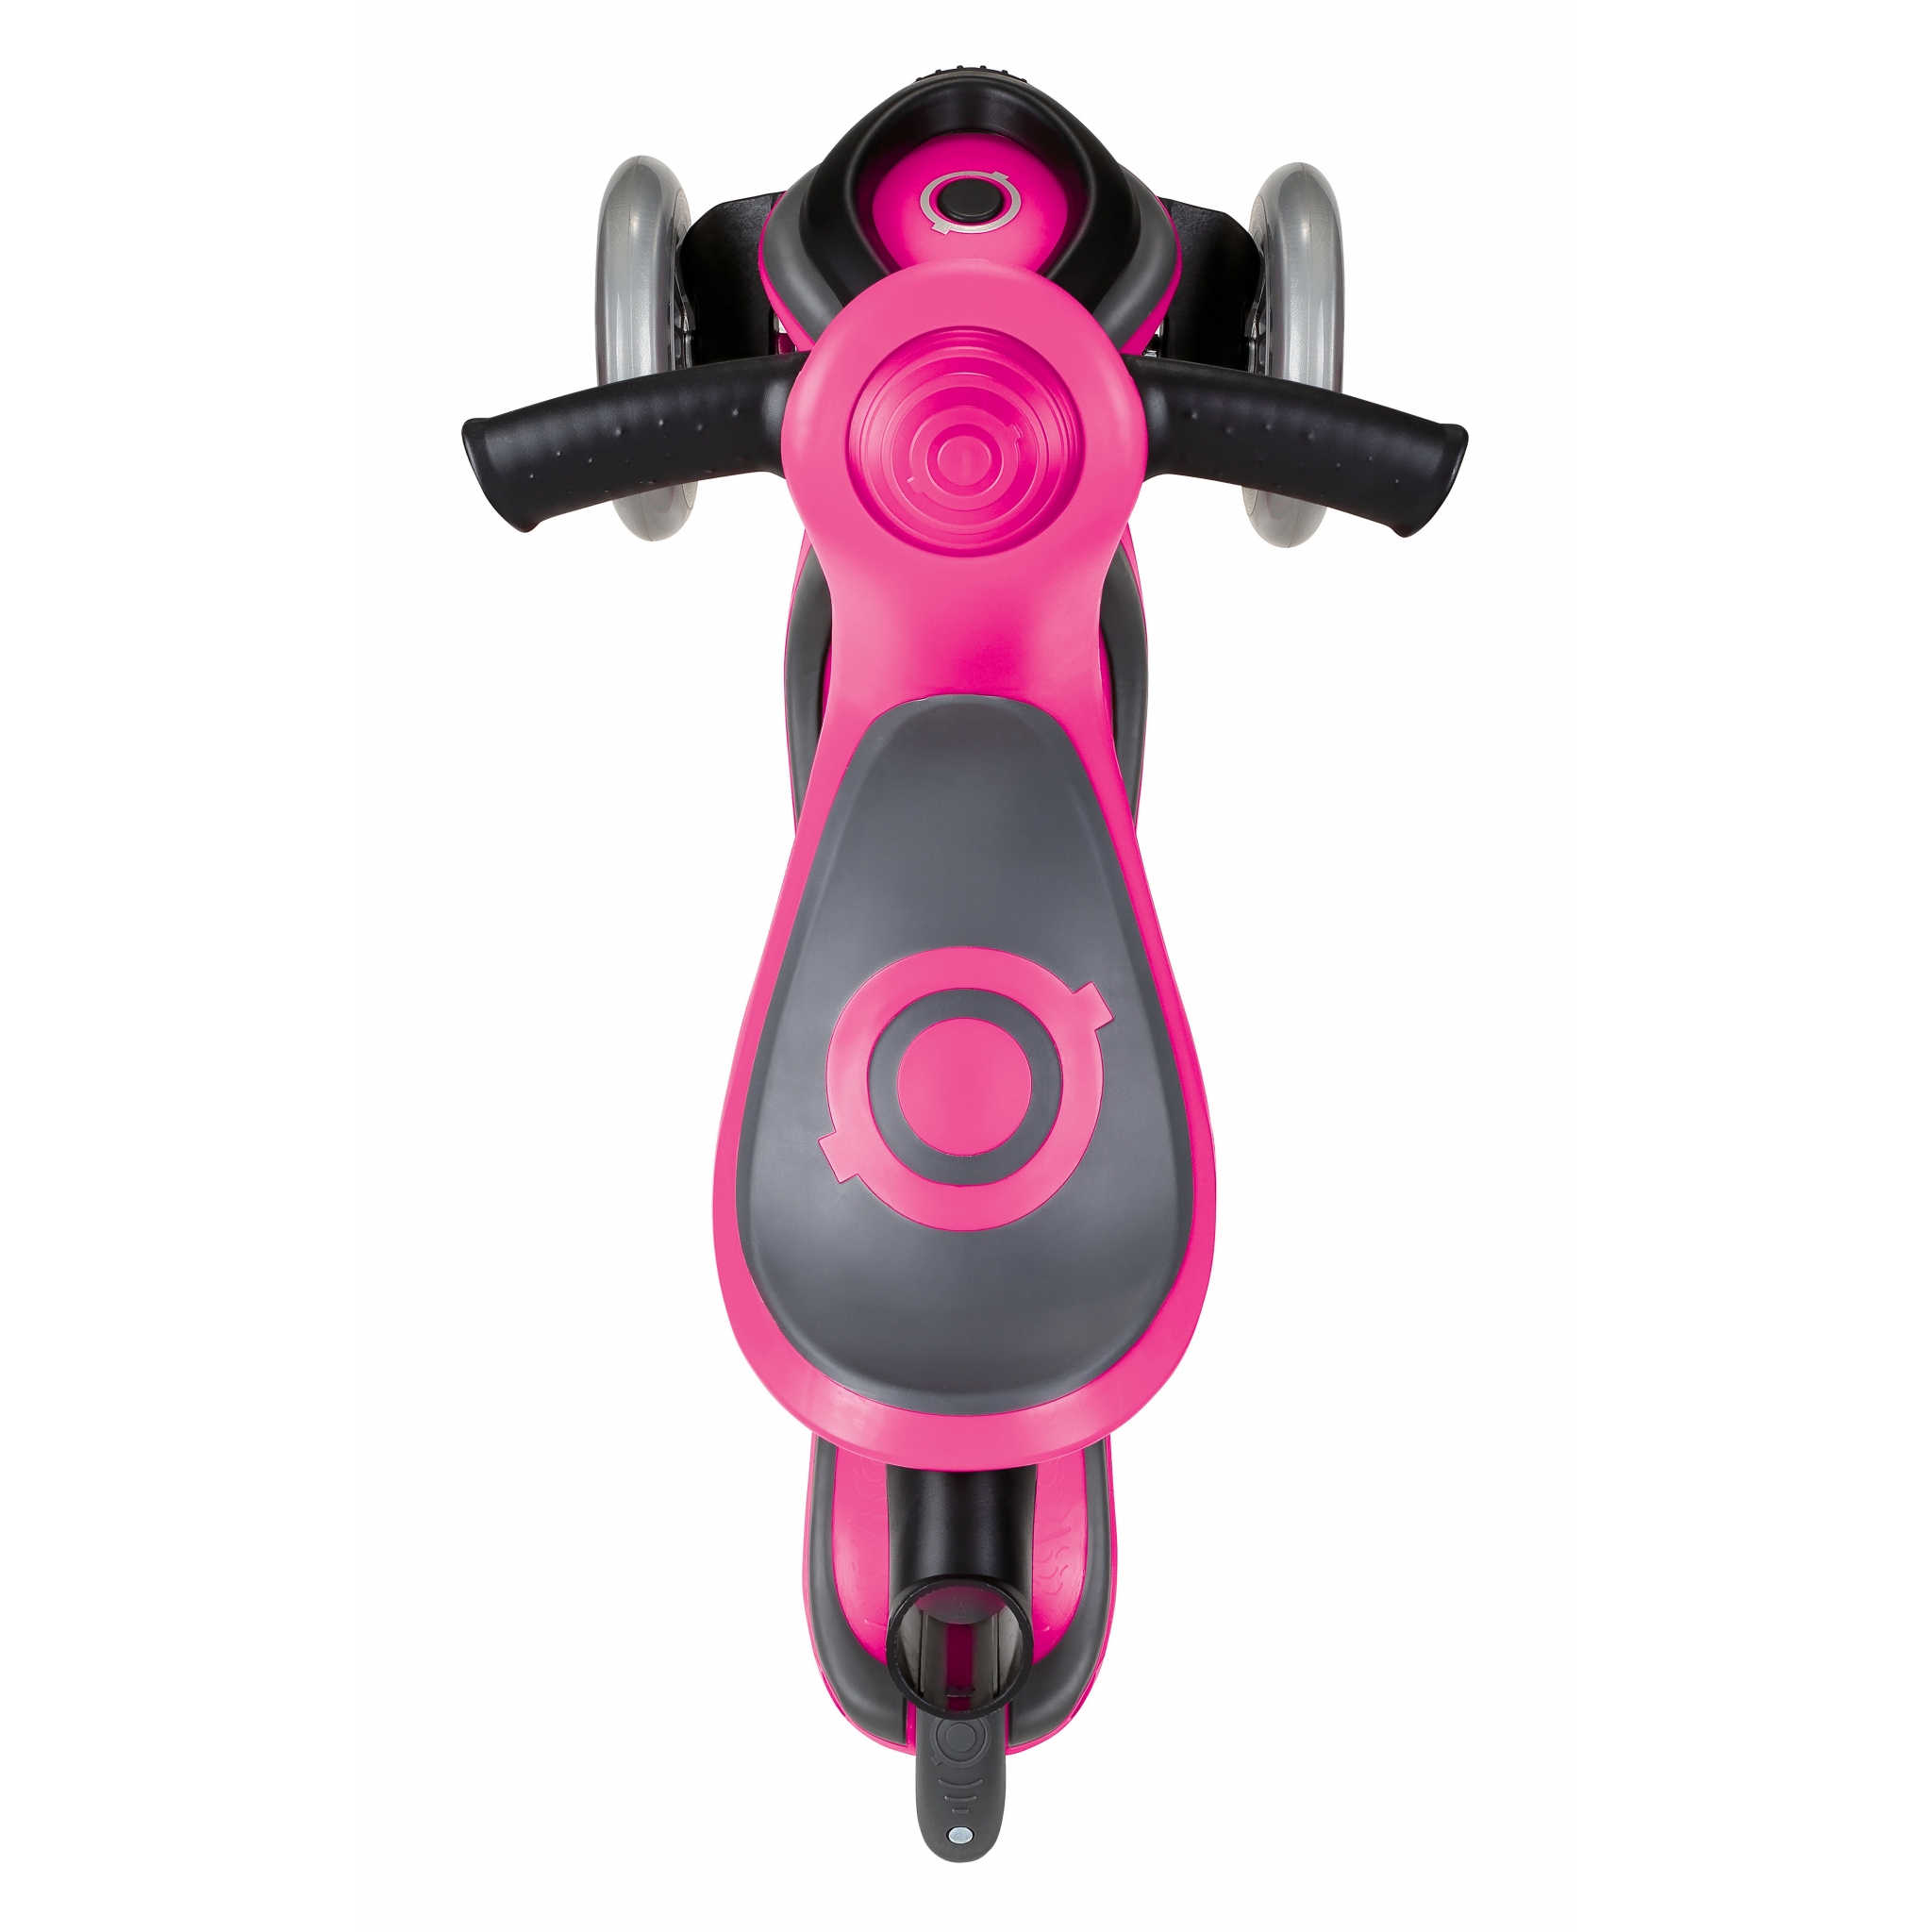 GO-UP-COMFORT-scooter-with-seat-extra-wide-seat-for-maximum-comfort-deep-pink 3